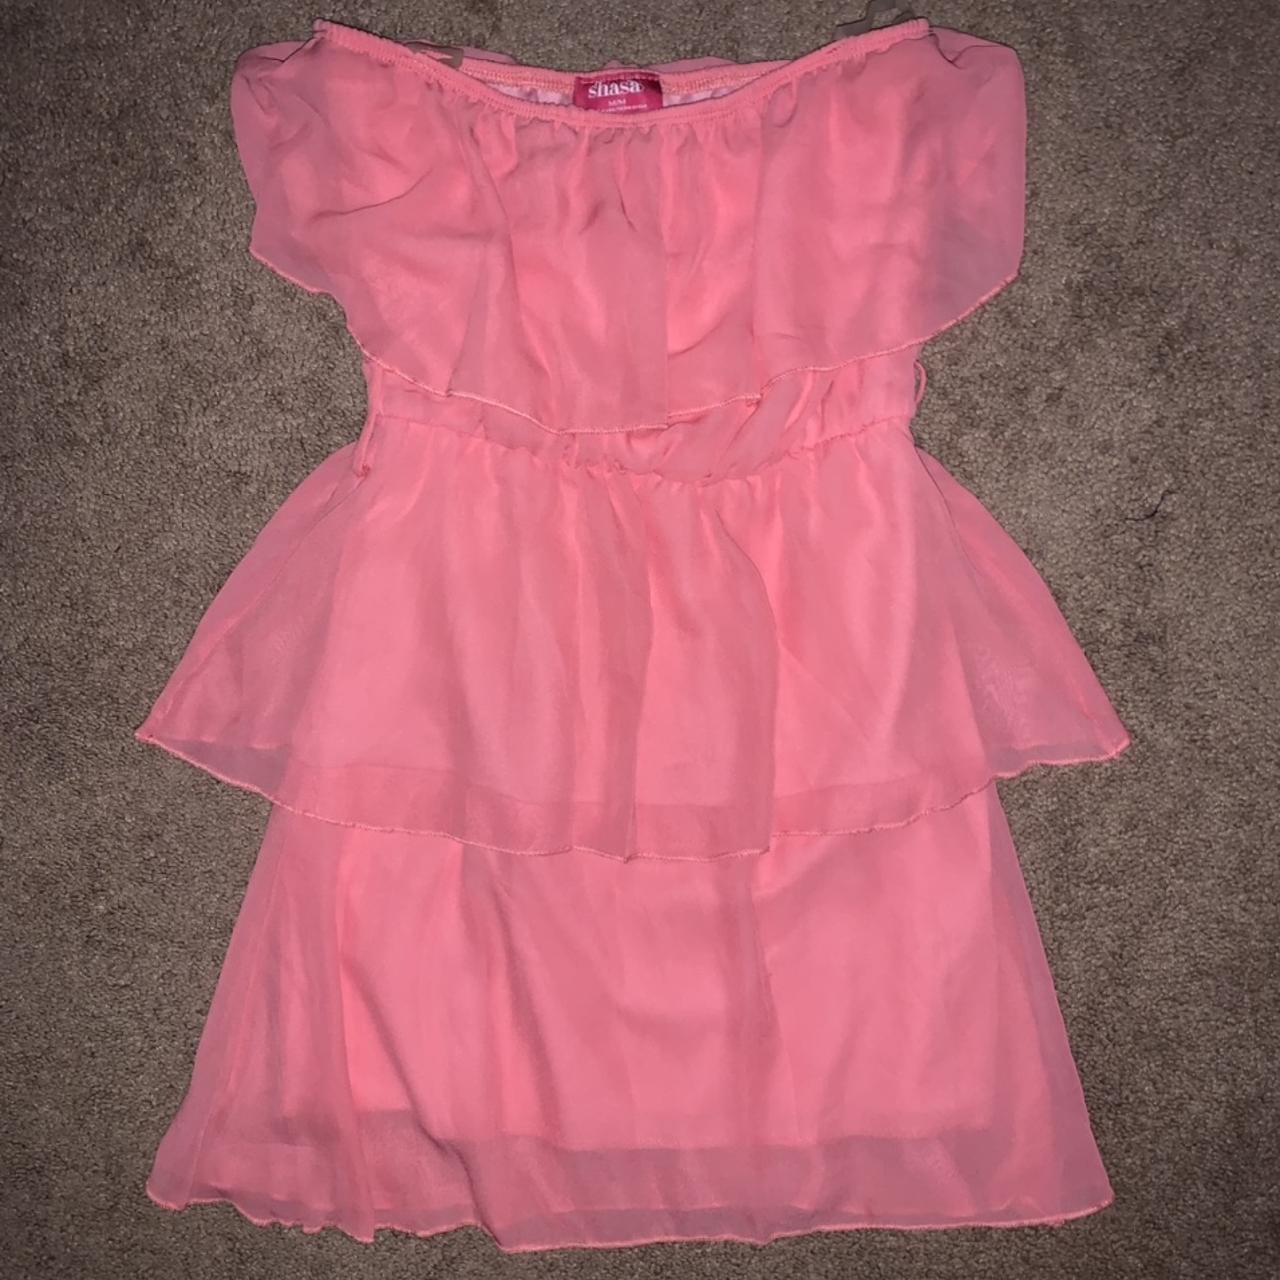 Beautiful Pink Strapless Dress. Super cute! There is... - Depop